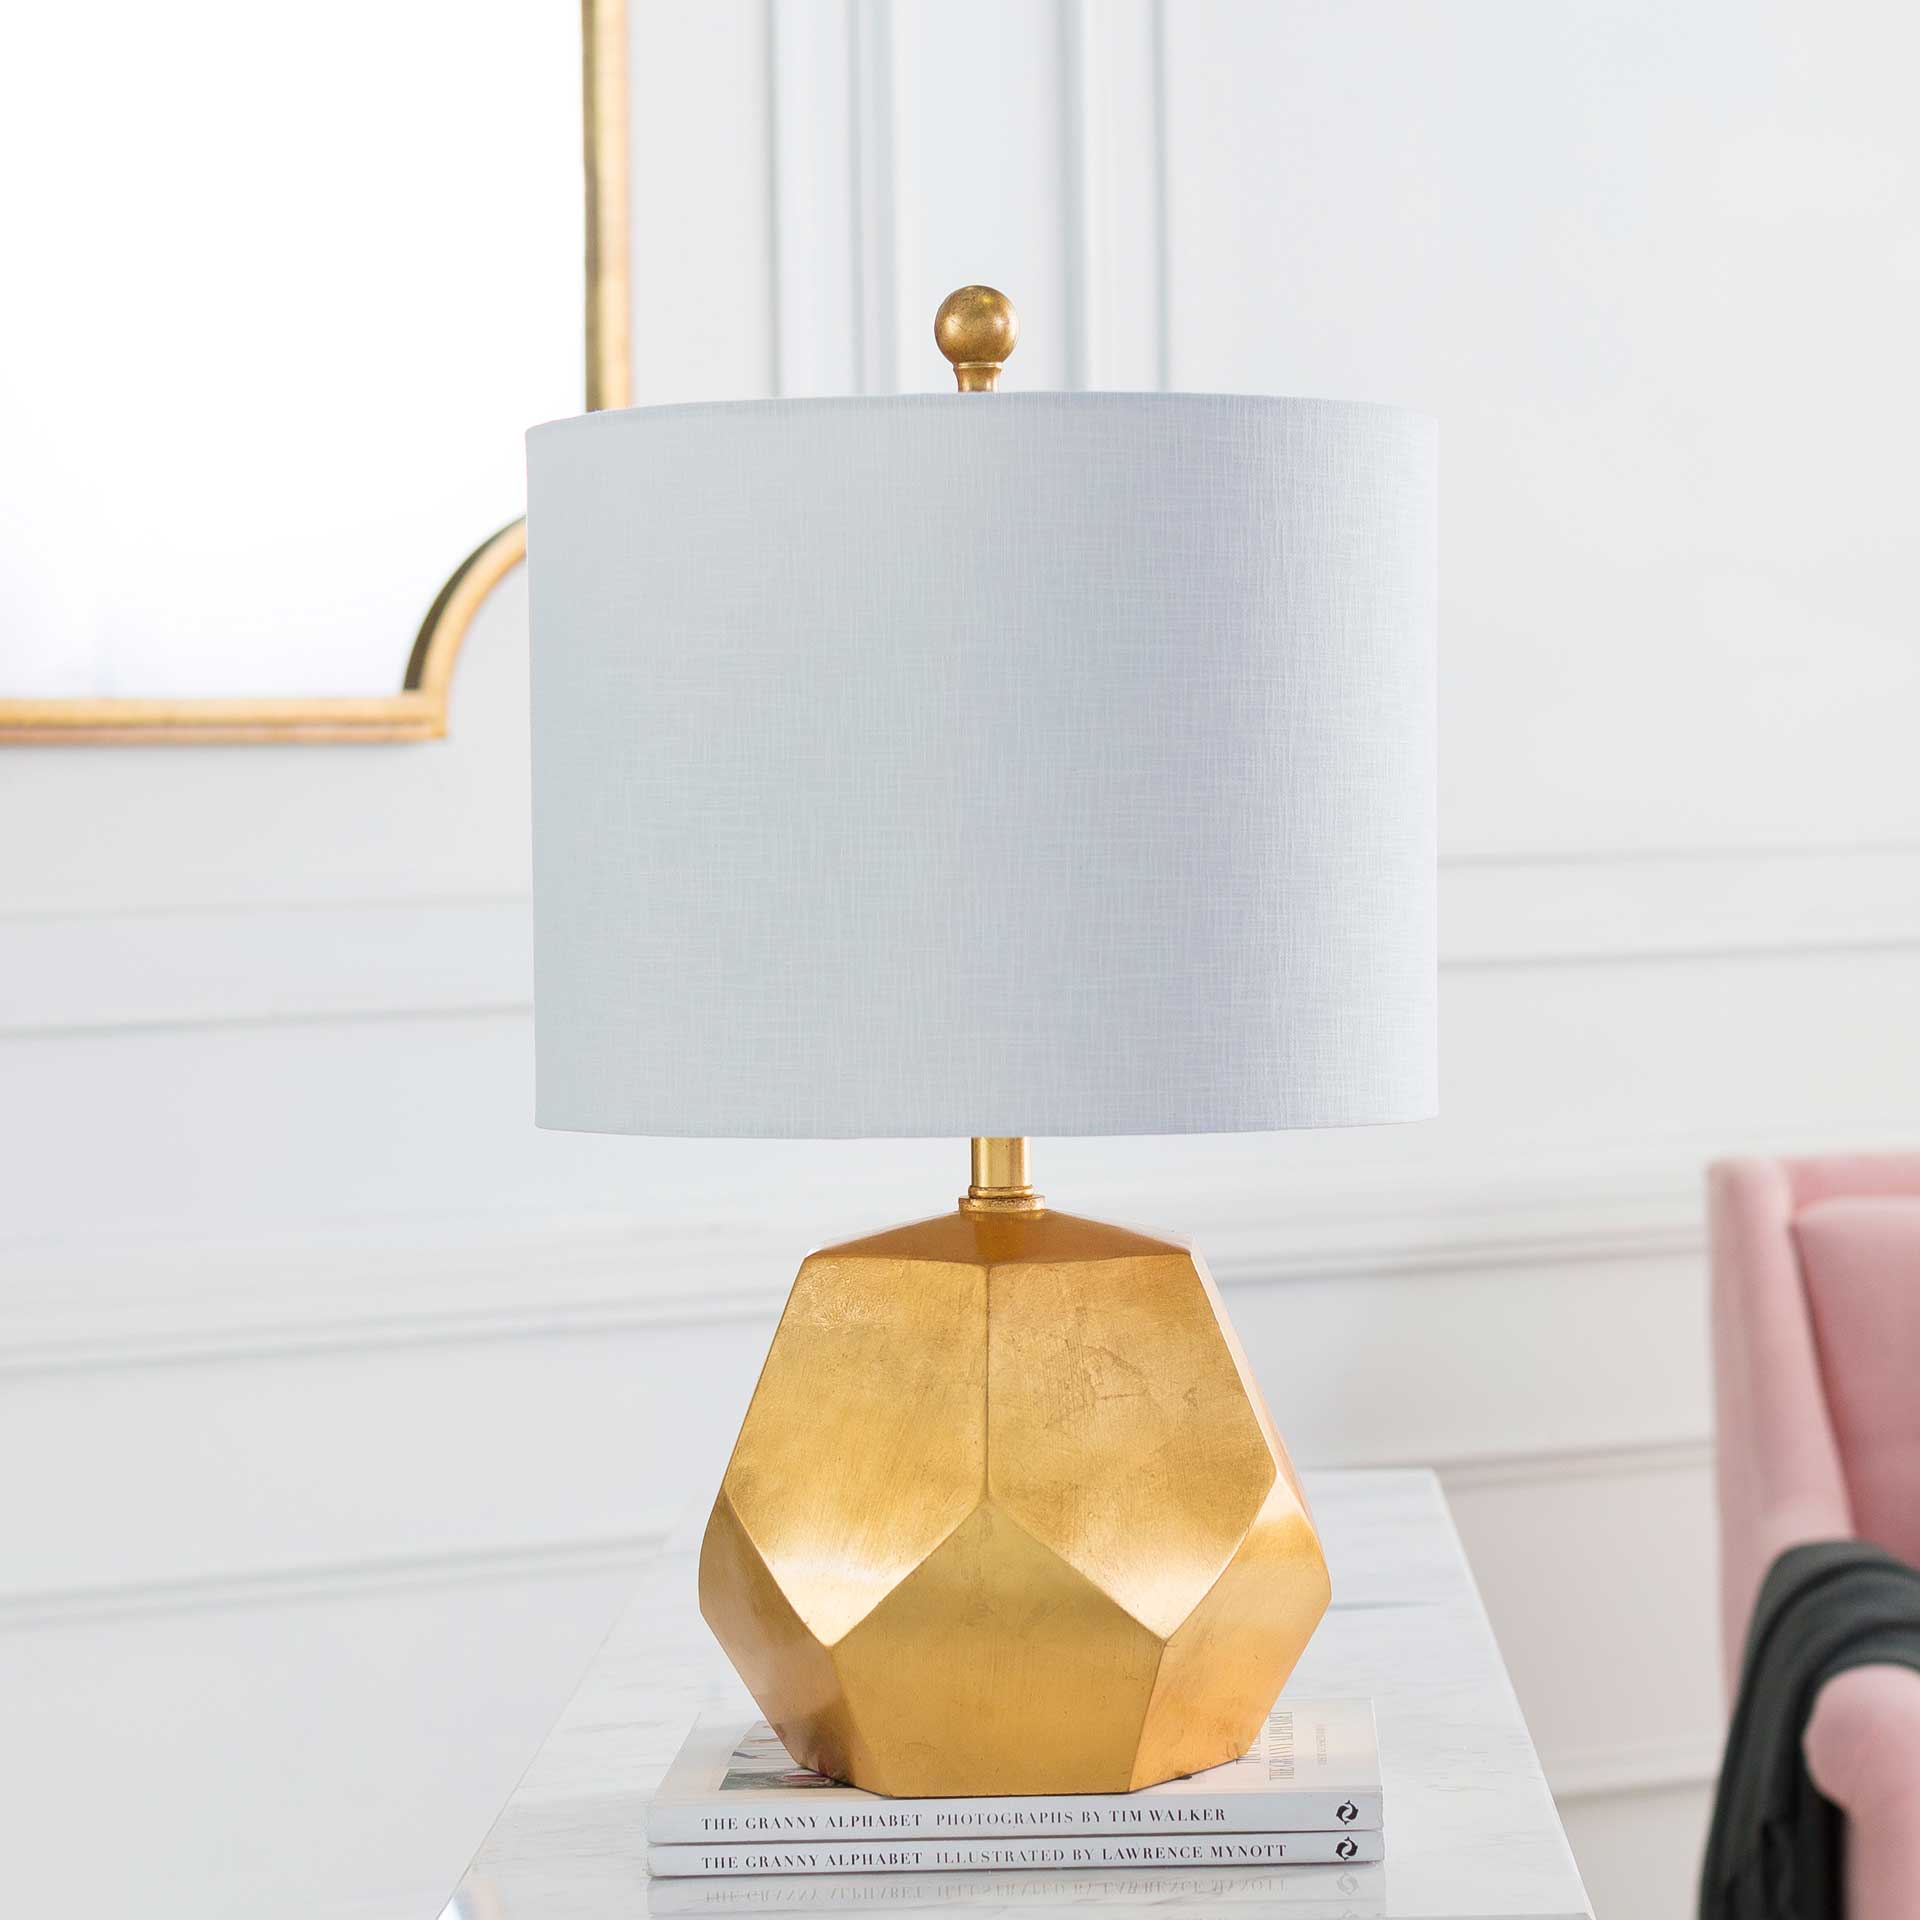 Finley Table Lamp White/Gold